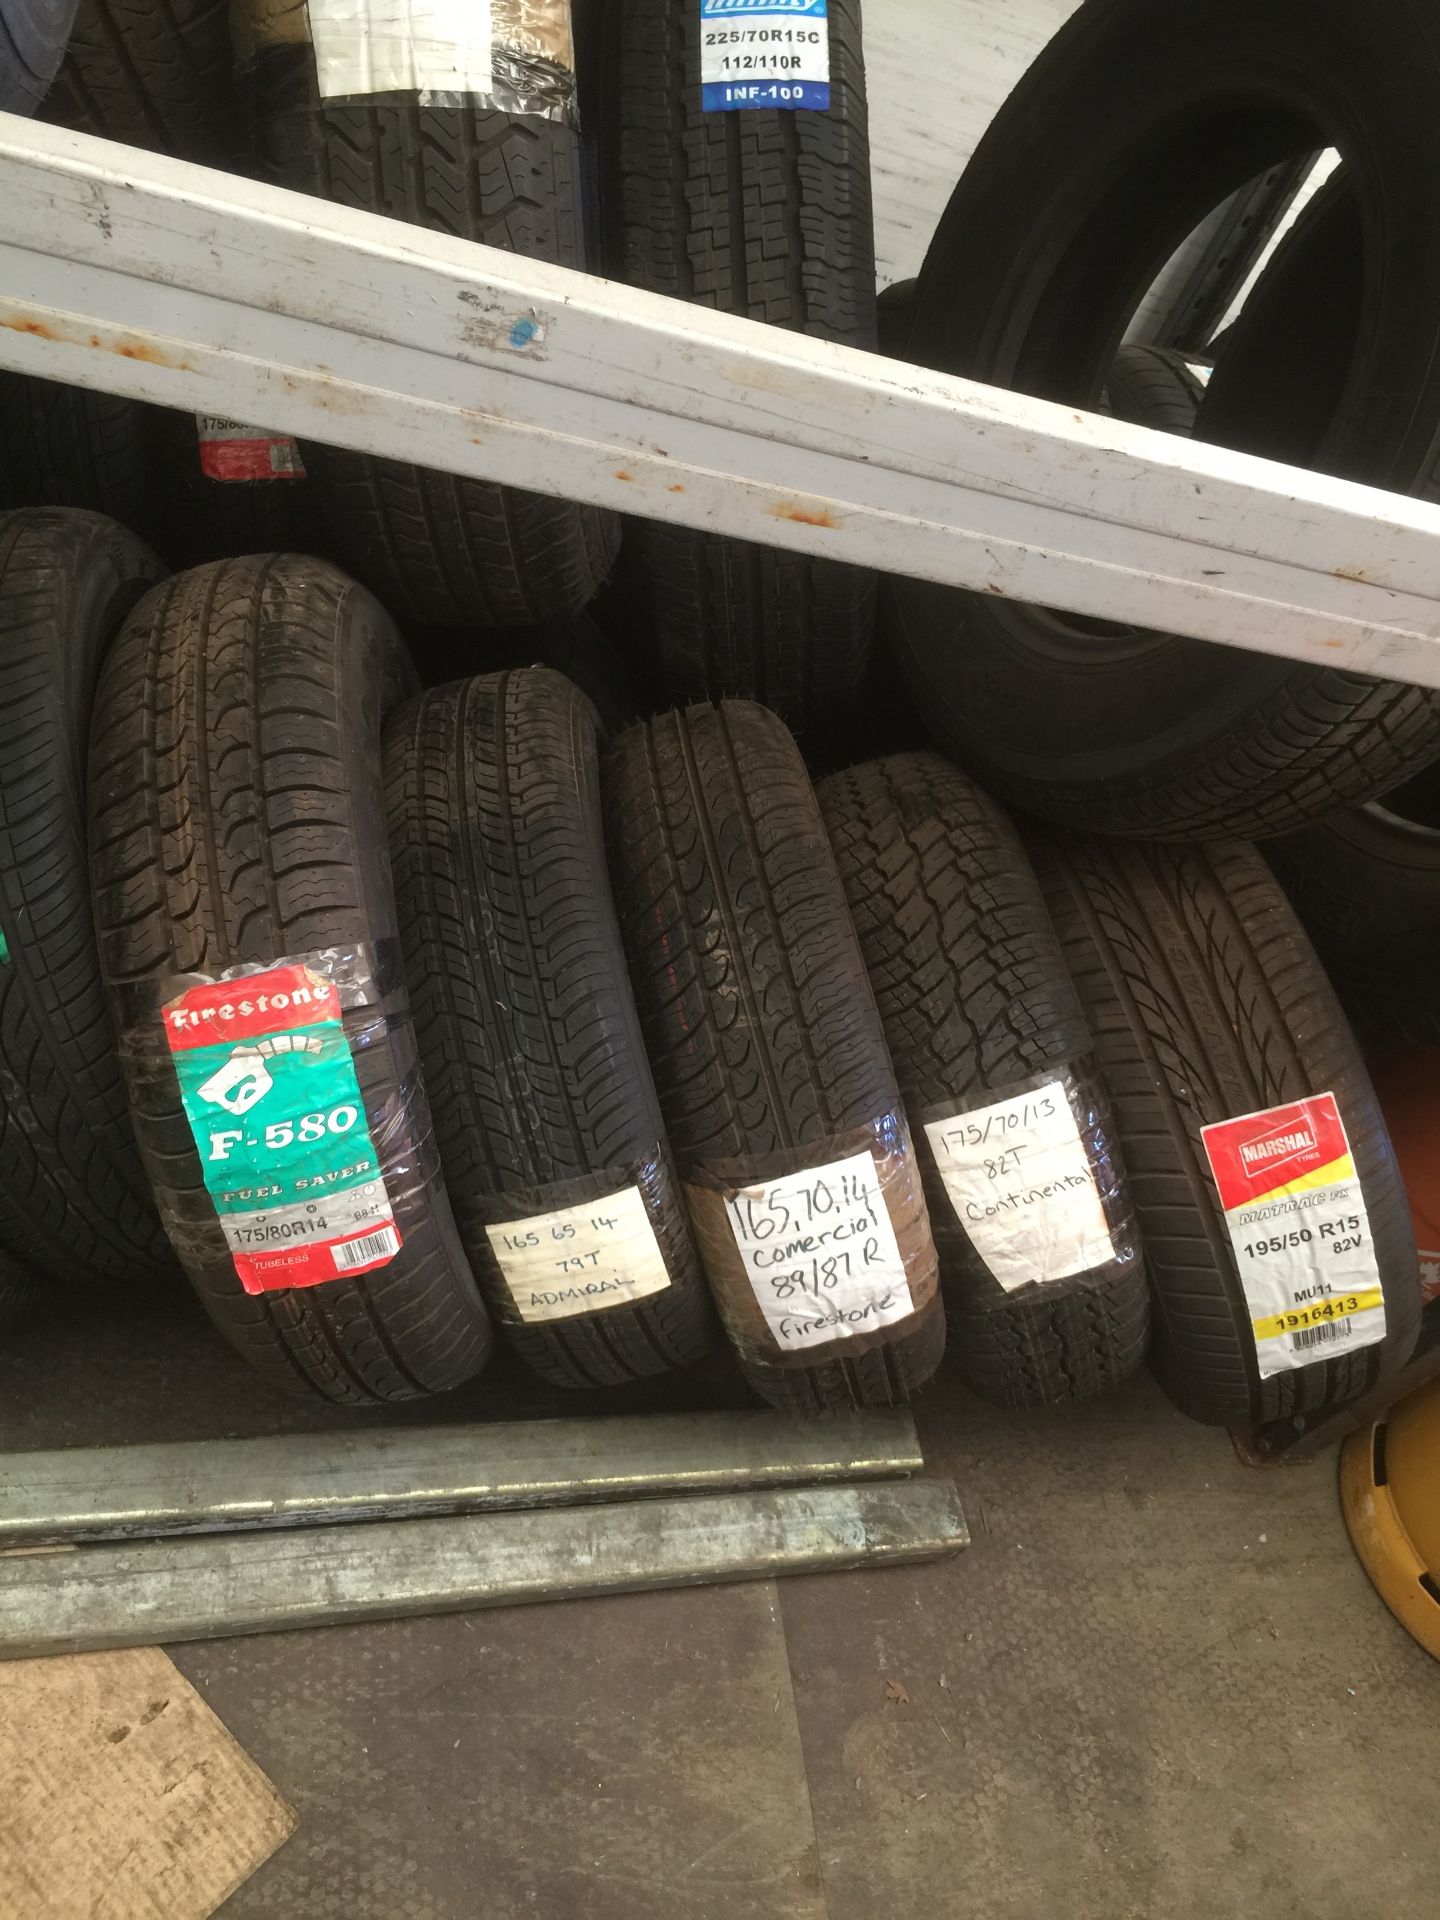 115 + Brand new and unused car tyres - A range of brands and sizes as shown it pictures - Complete - Image 12 of 19